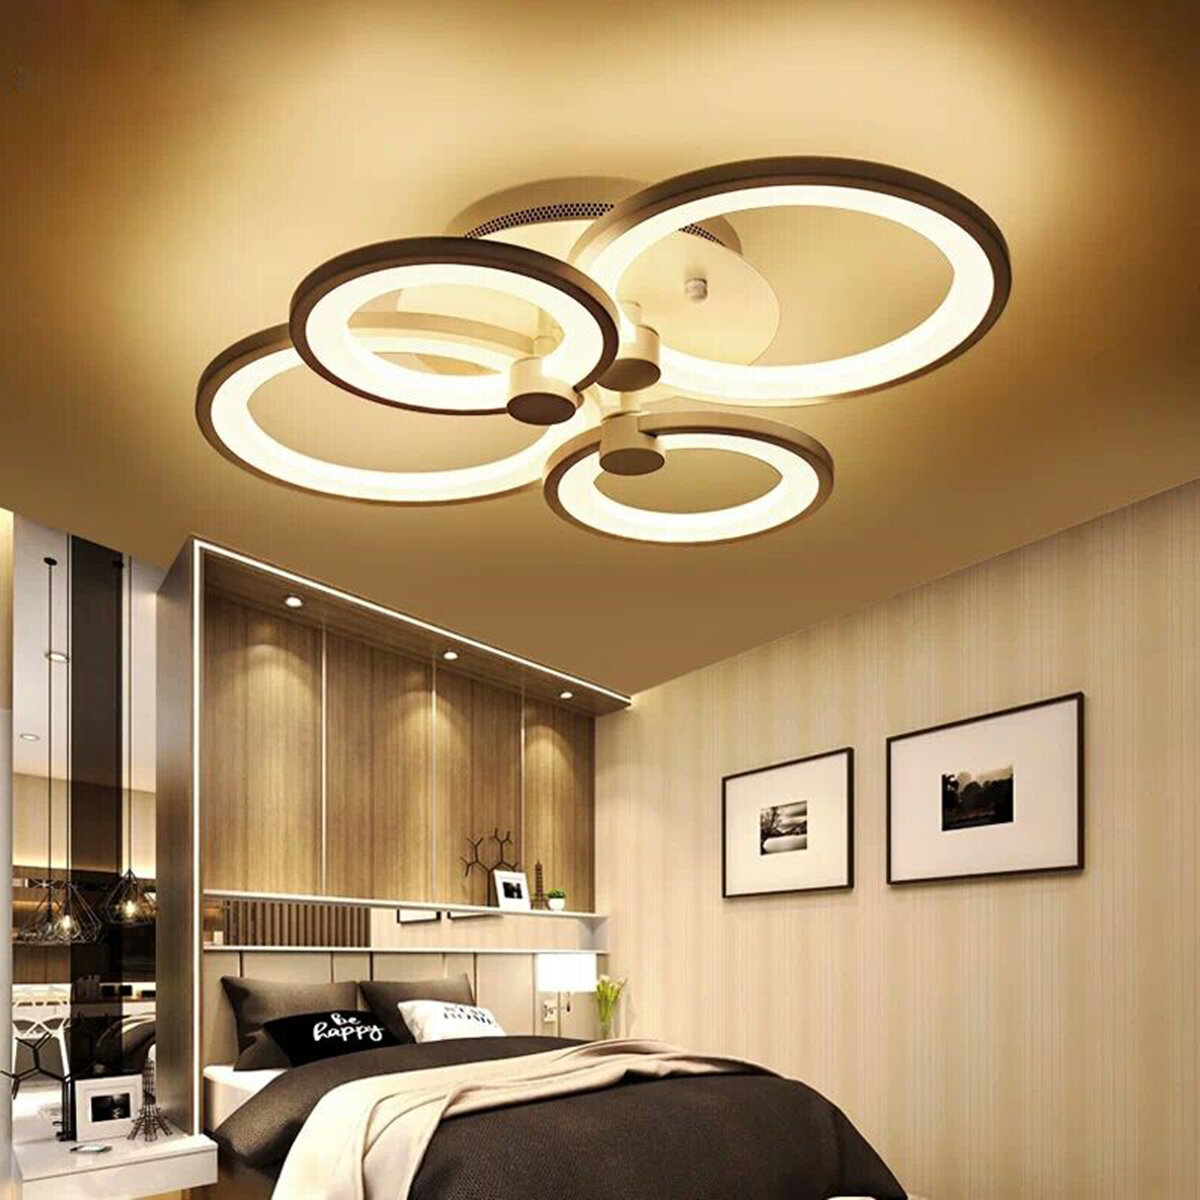 Image of 4 Heads LED Ceiling Light Pendant Lamp Hallway Dimmable Remote Control Fixture